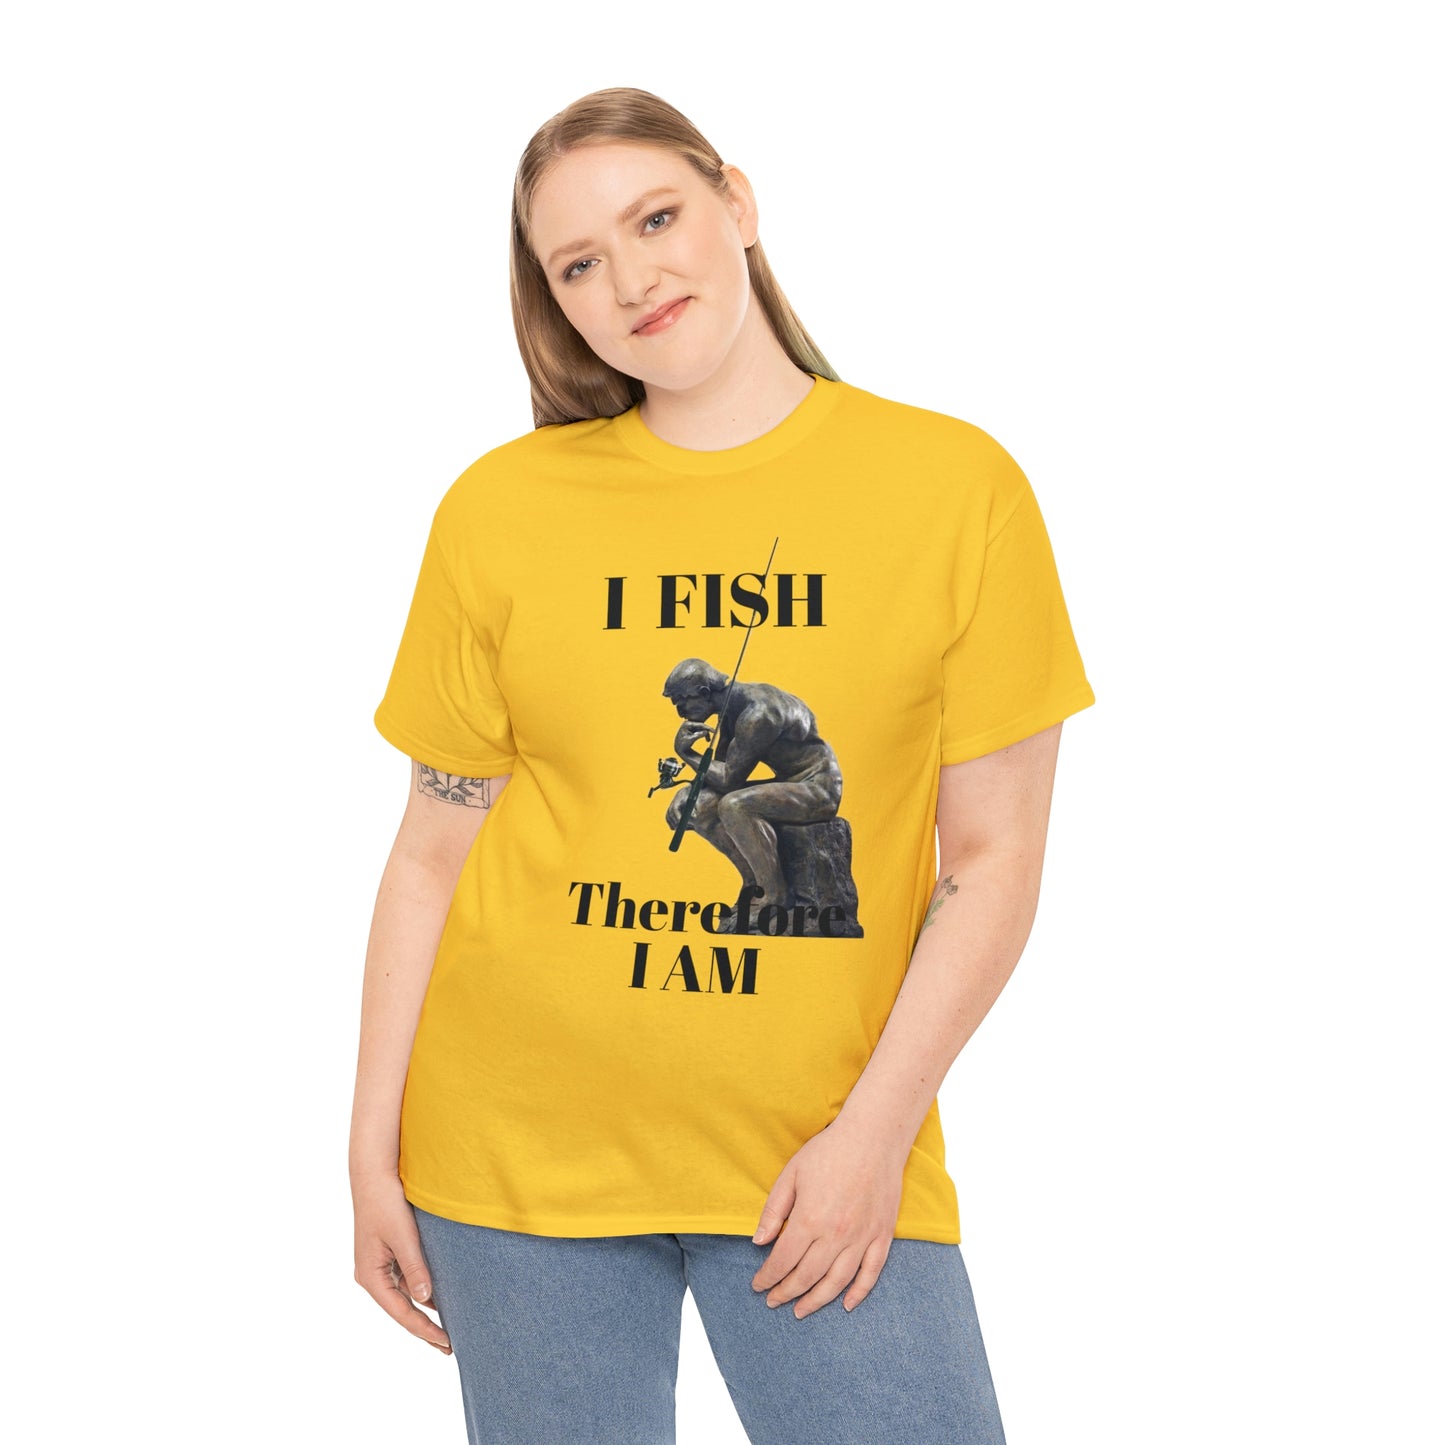 I Fish Therefore I am Tee Shirt